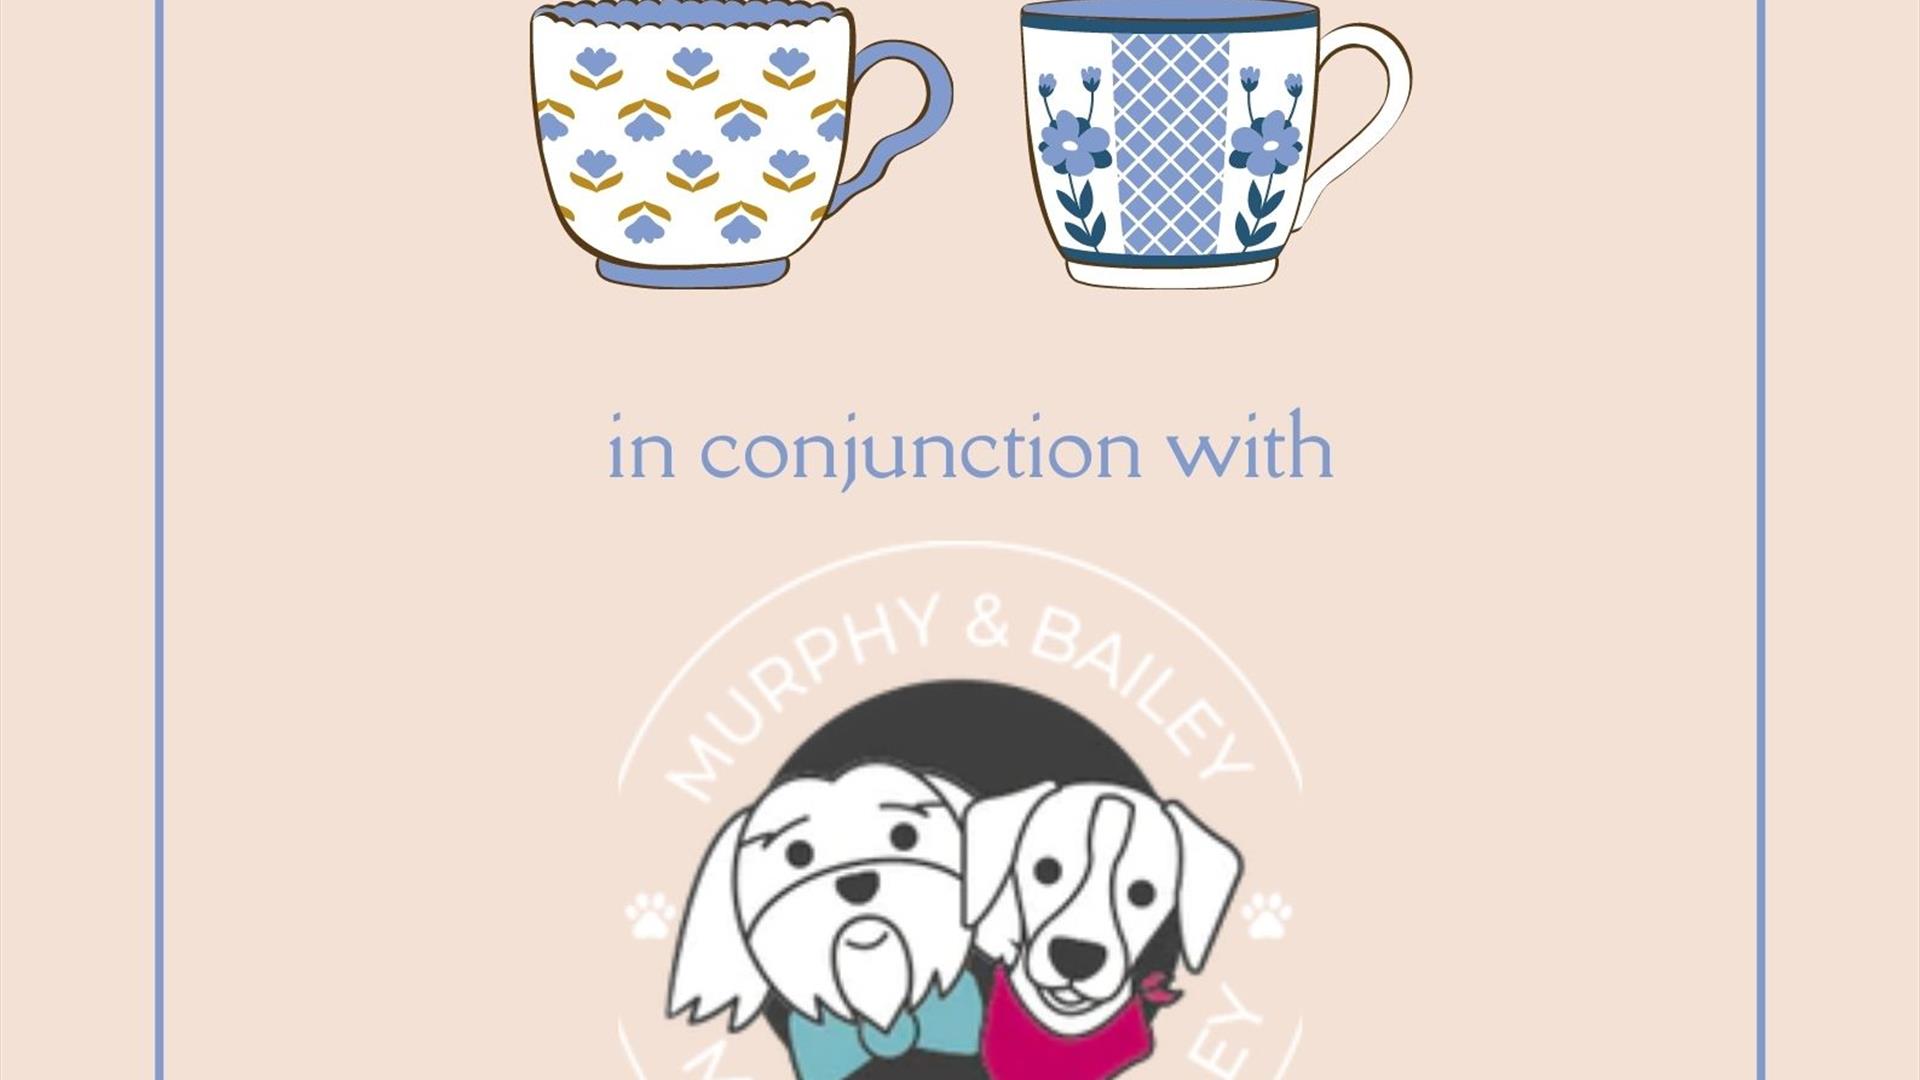 Image shows a poster with 'Pop Up Tea Shop' written with two blue tea cups and two white dogs